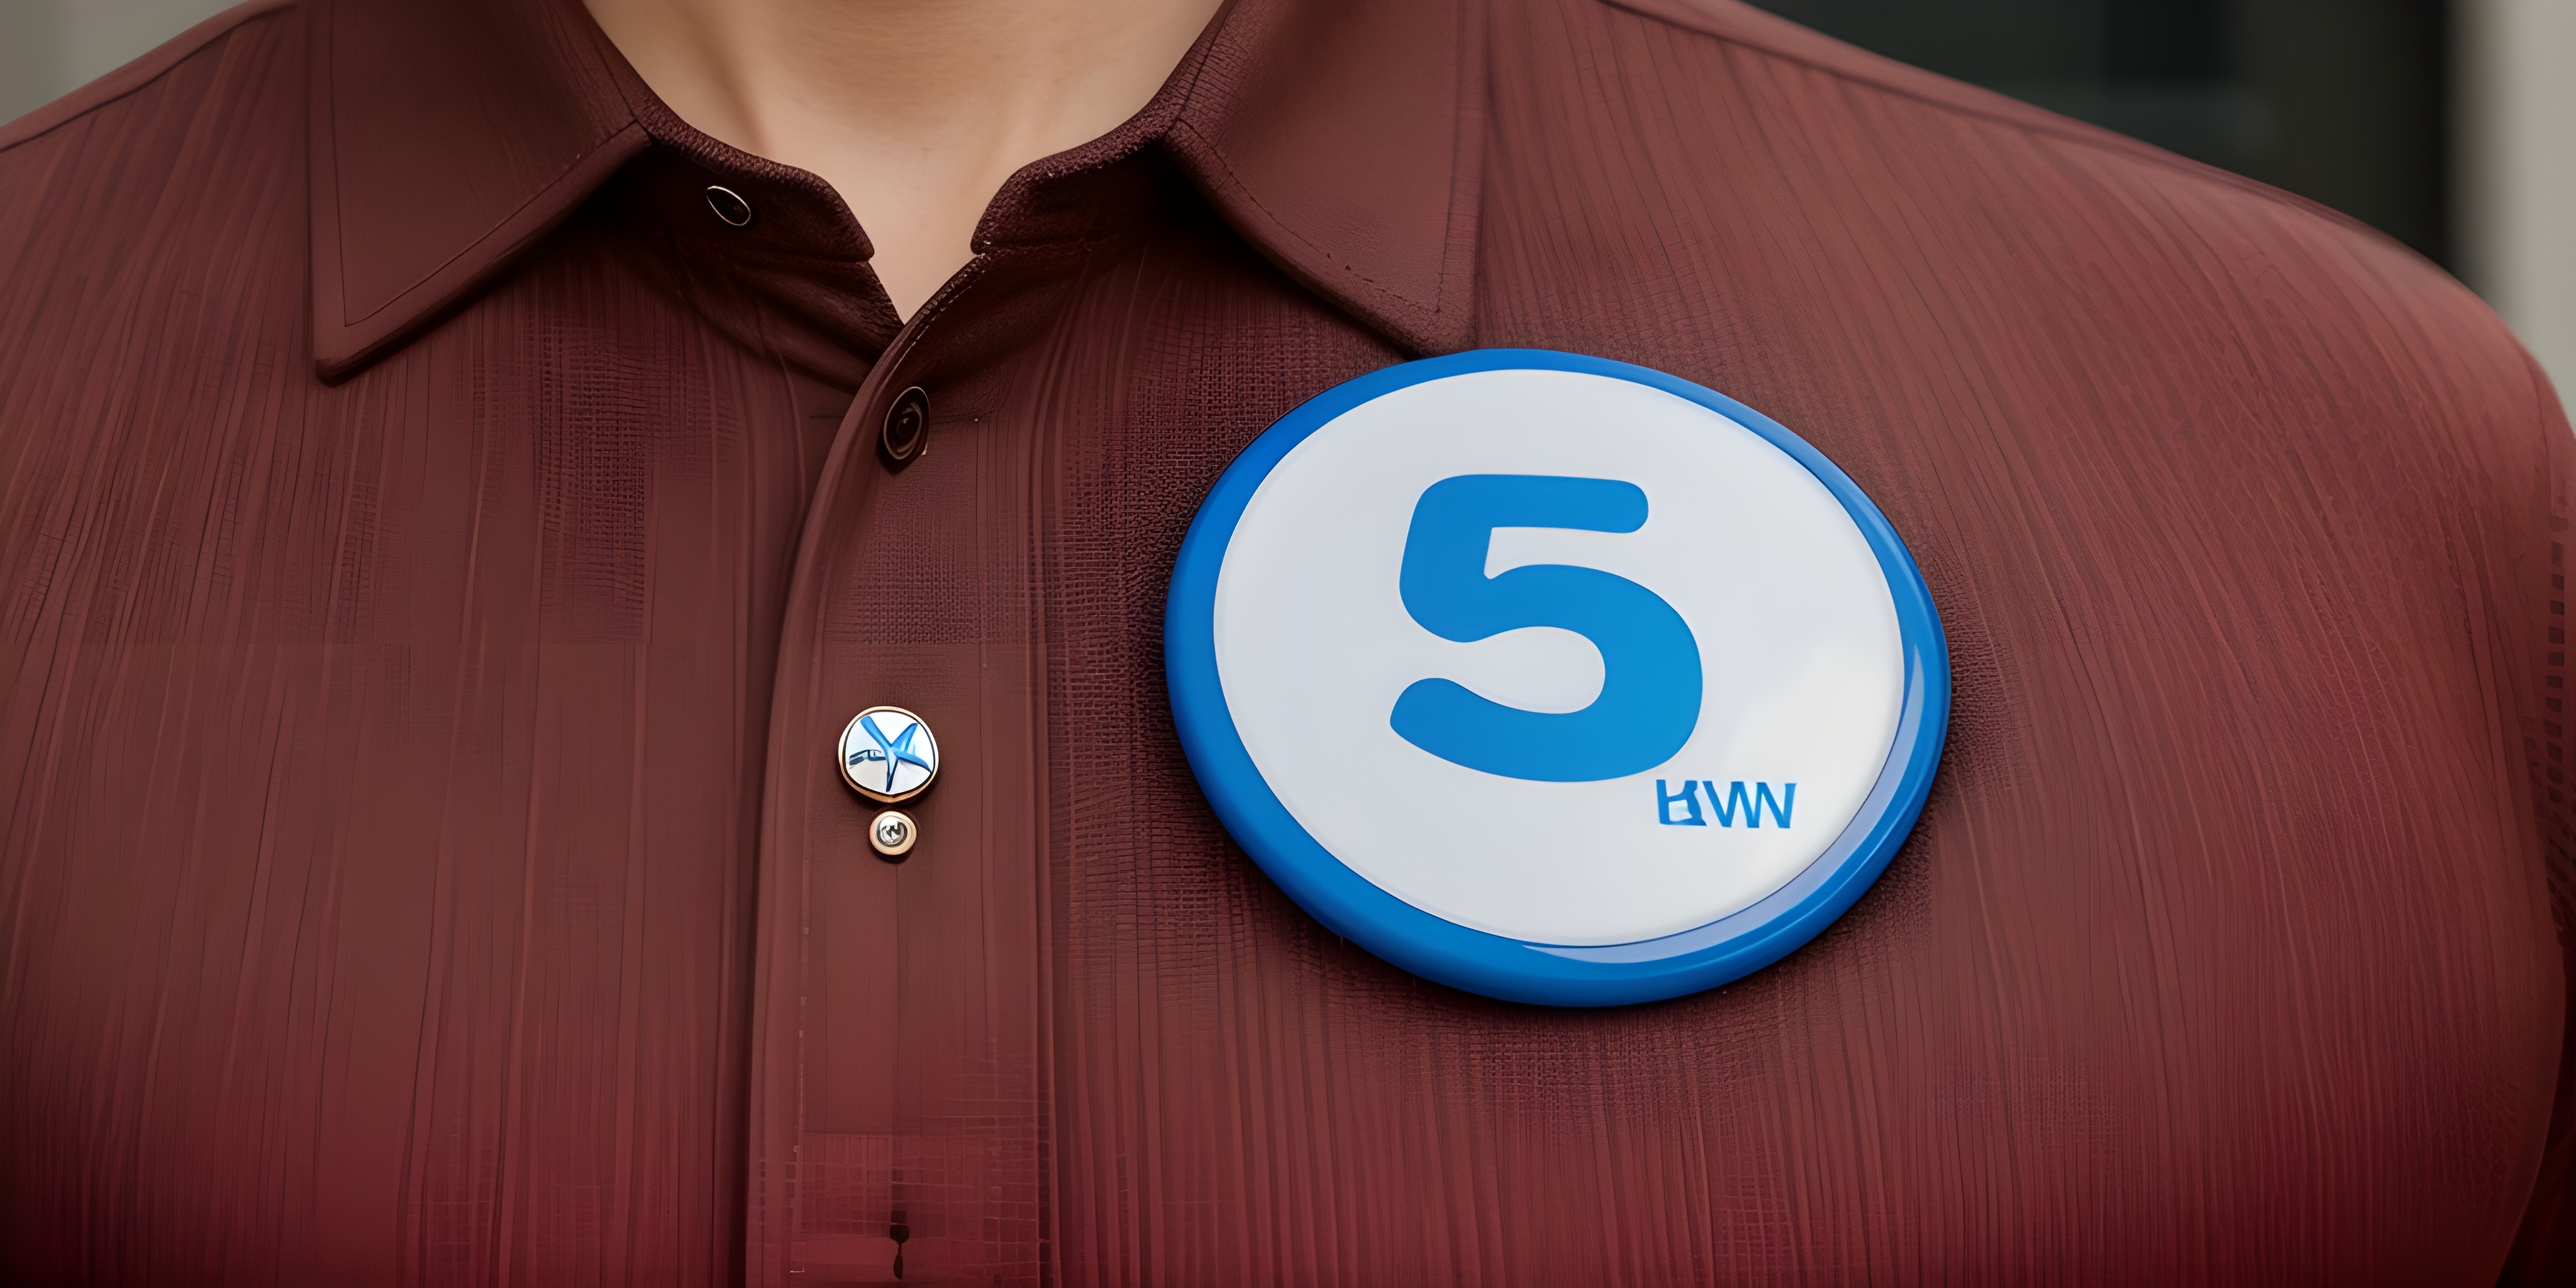 AI generated image for the prompt - Where did the badge come from? What's the point? Does it actually mean anything? - a large badge with the number 5 and garbled text on a maroon shirt